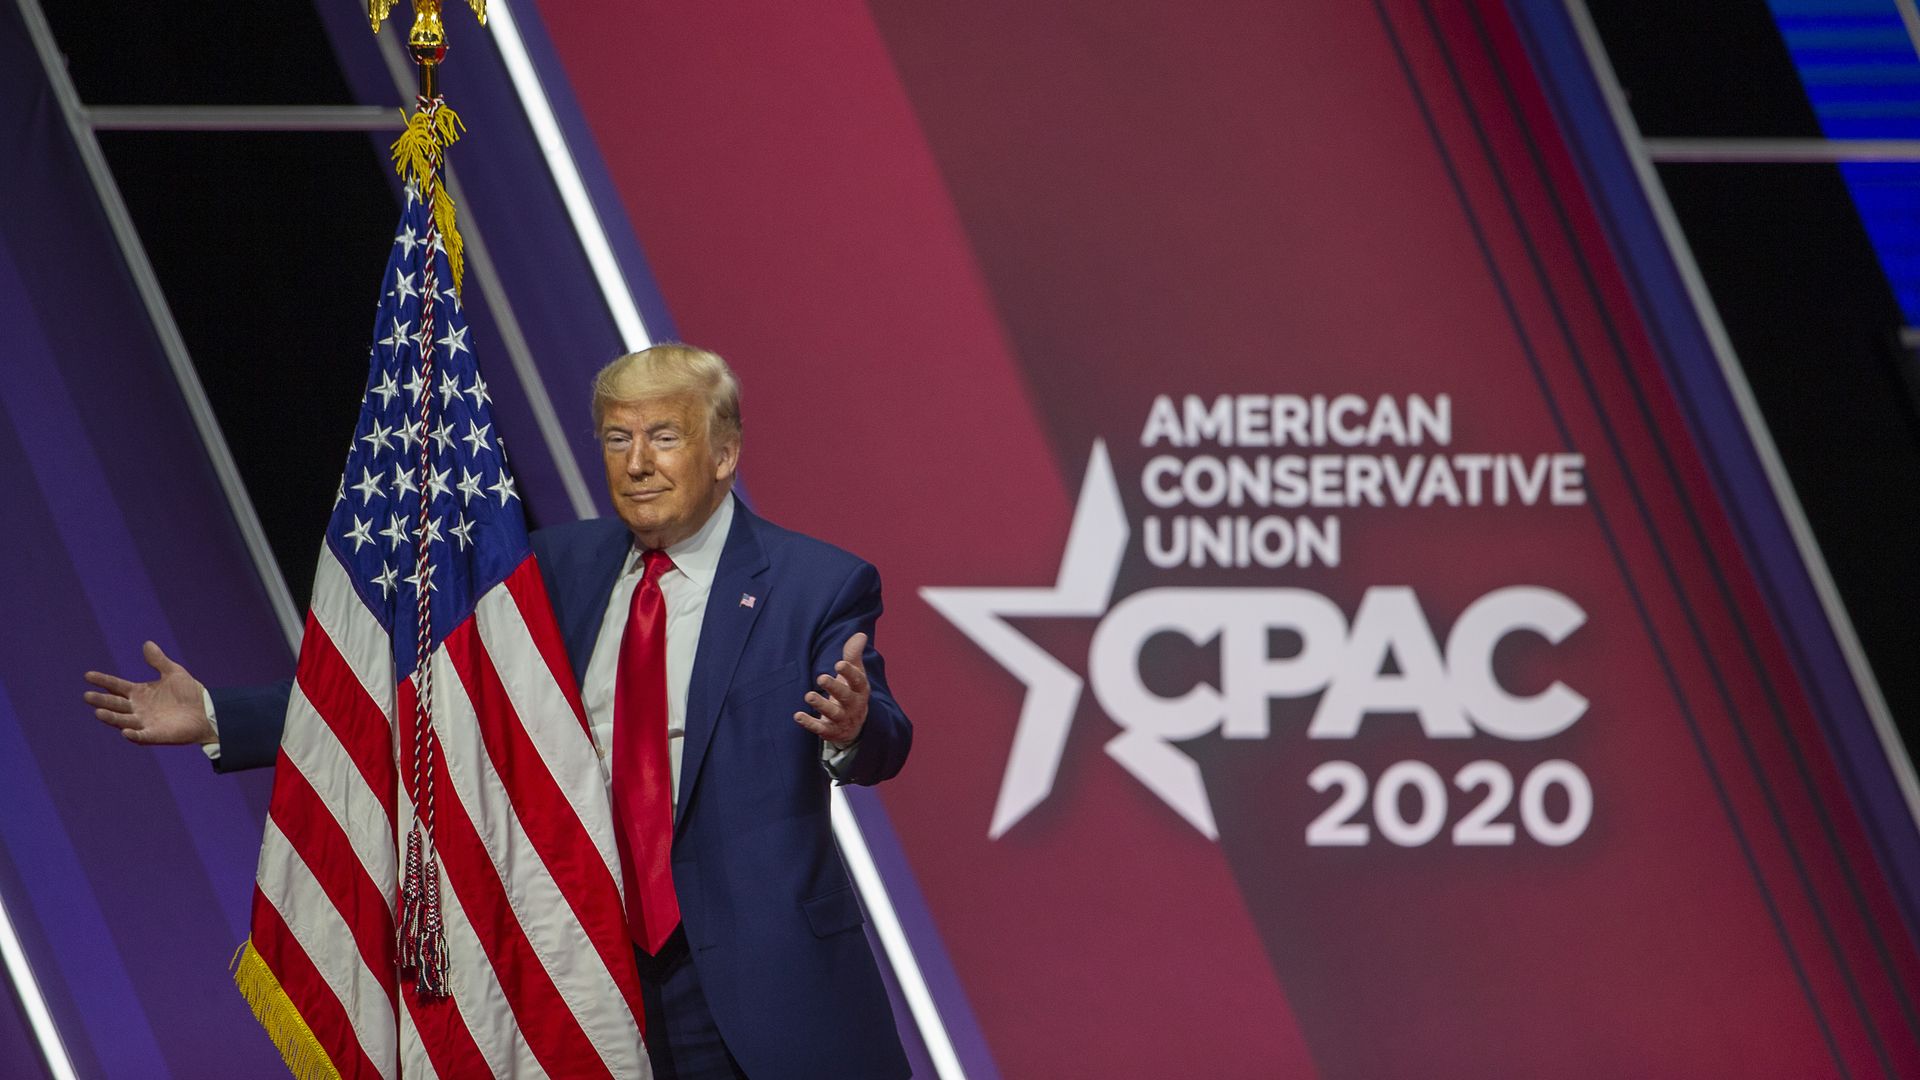 In this image, Trump stands next to a CPAC sign